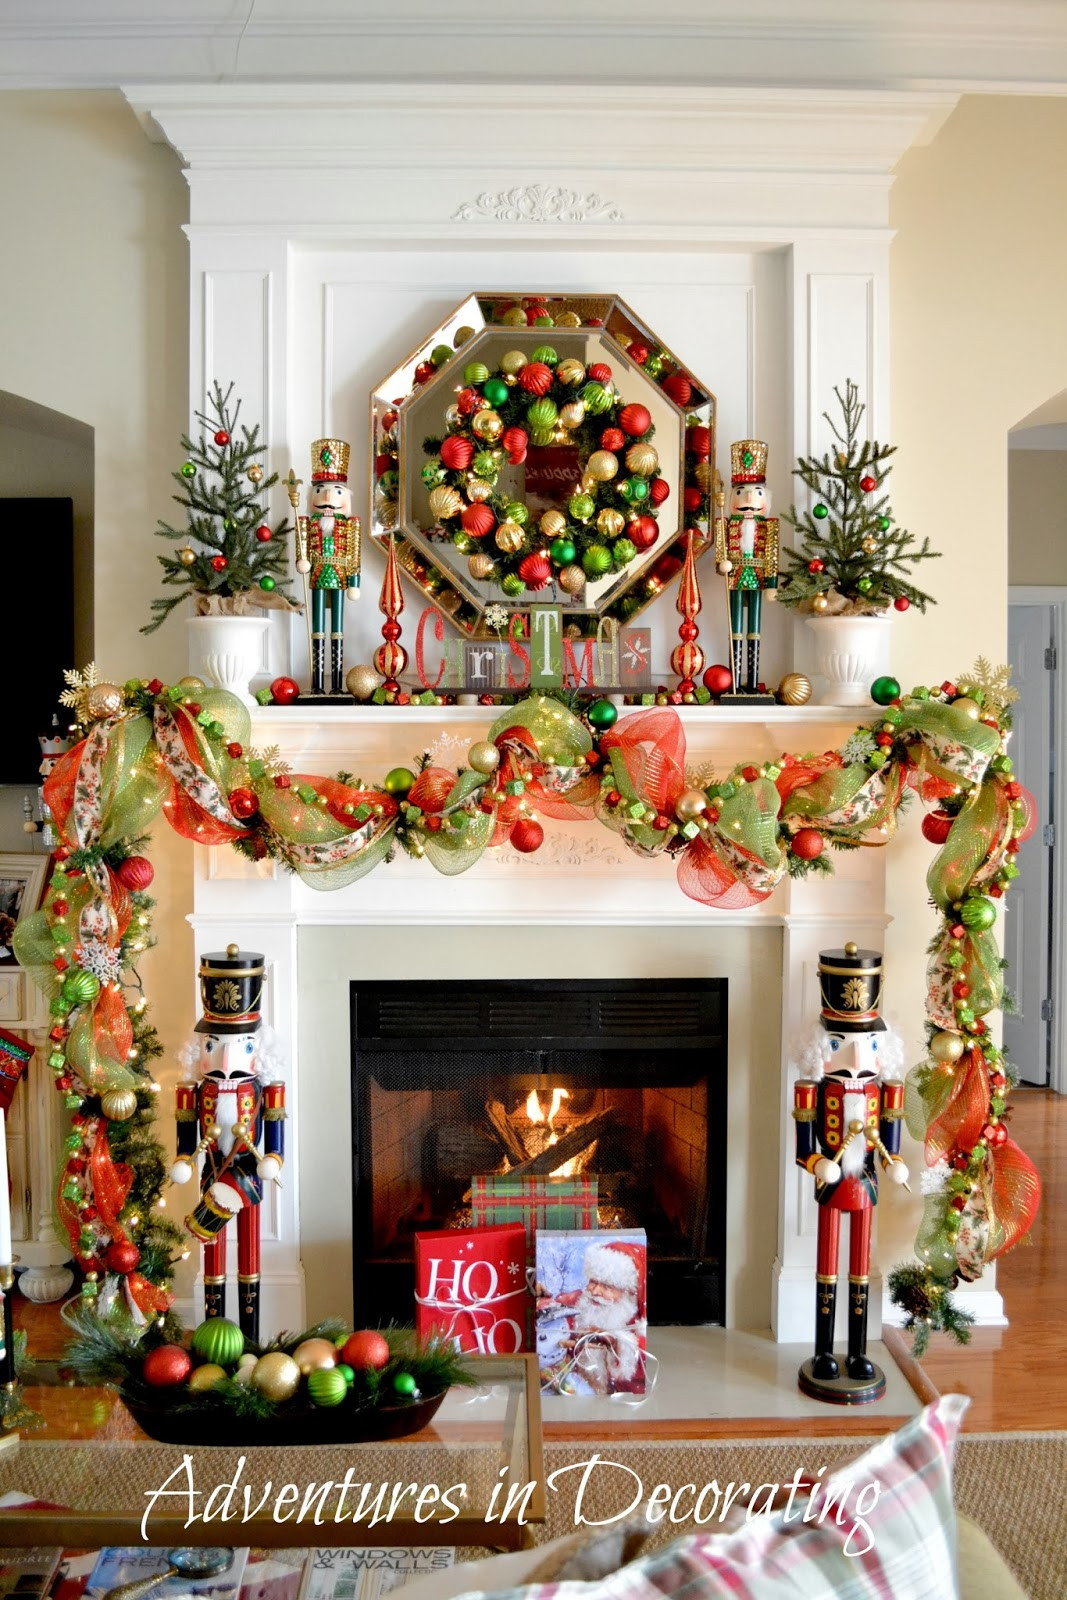 Christmas Fireplace Mantle Decorations
 Adventures in Decorating Our Christmas Mantel and "Deck